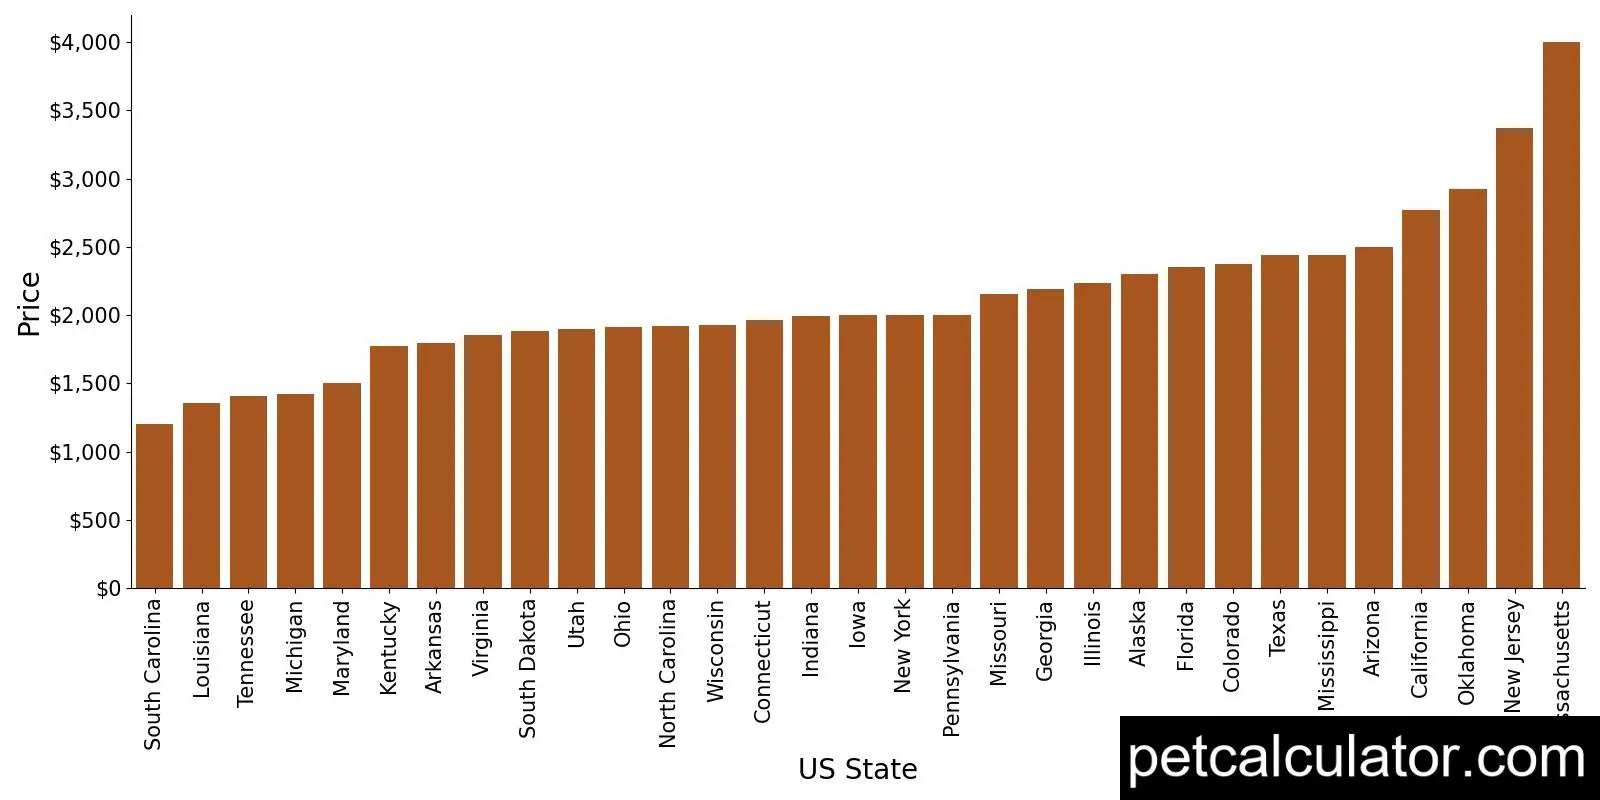 Price of Bichon Frise by US State 